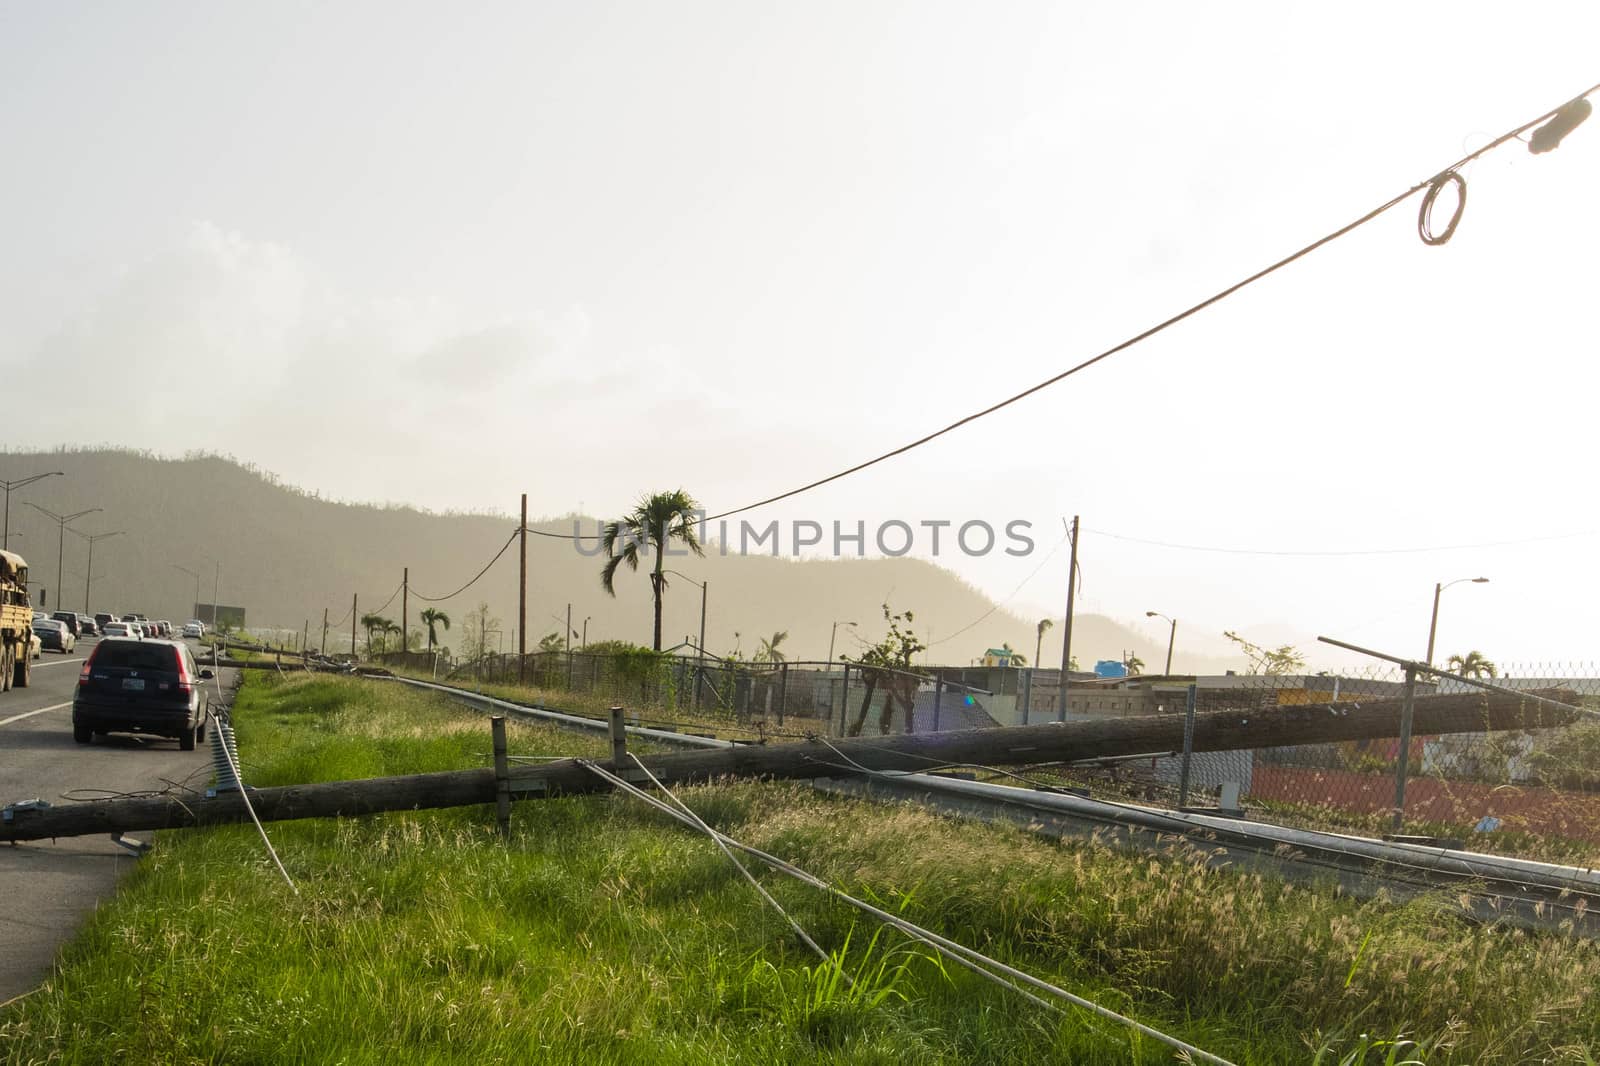 Hurricane Maria Damage in Puerto Rico by cestes001